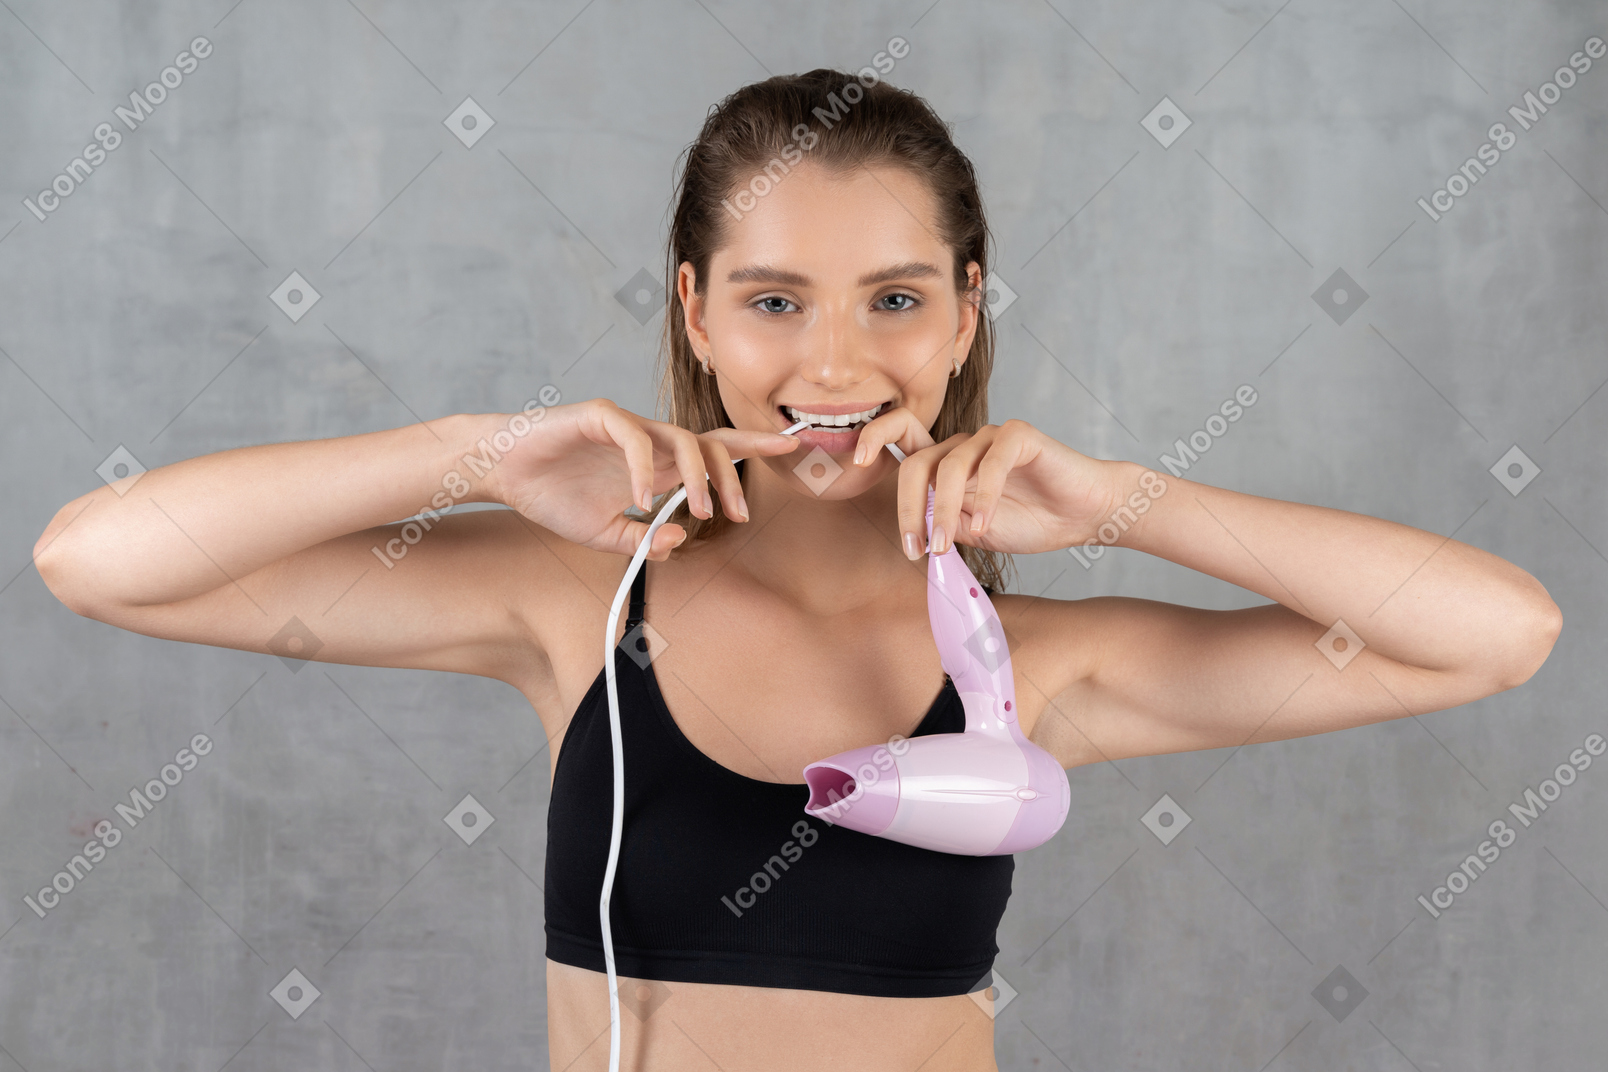 Front view of a smiling young woman biting hairdryer cord